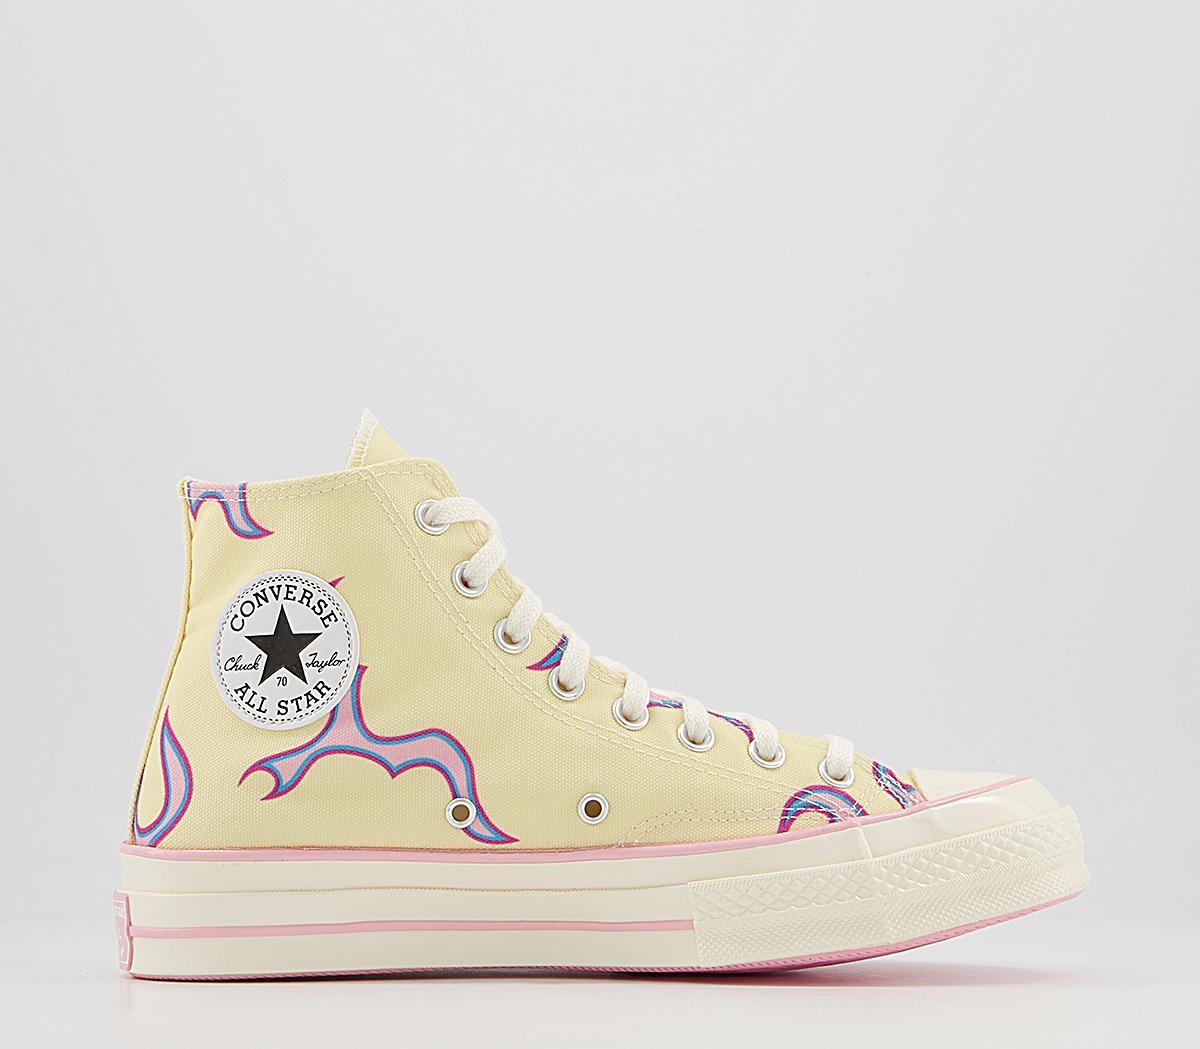 ConverseAll Star Hi 70s TrainersTtc Flame Yellow